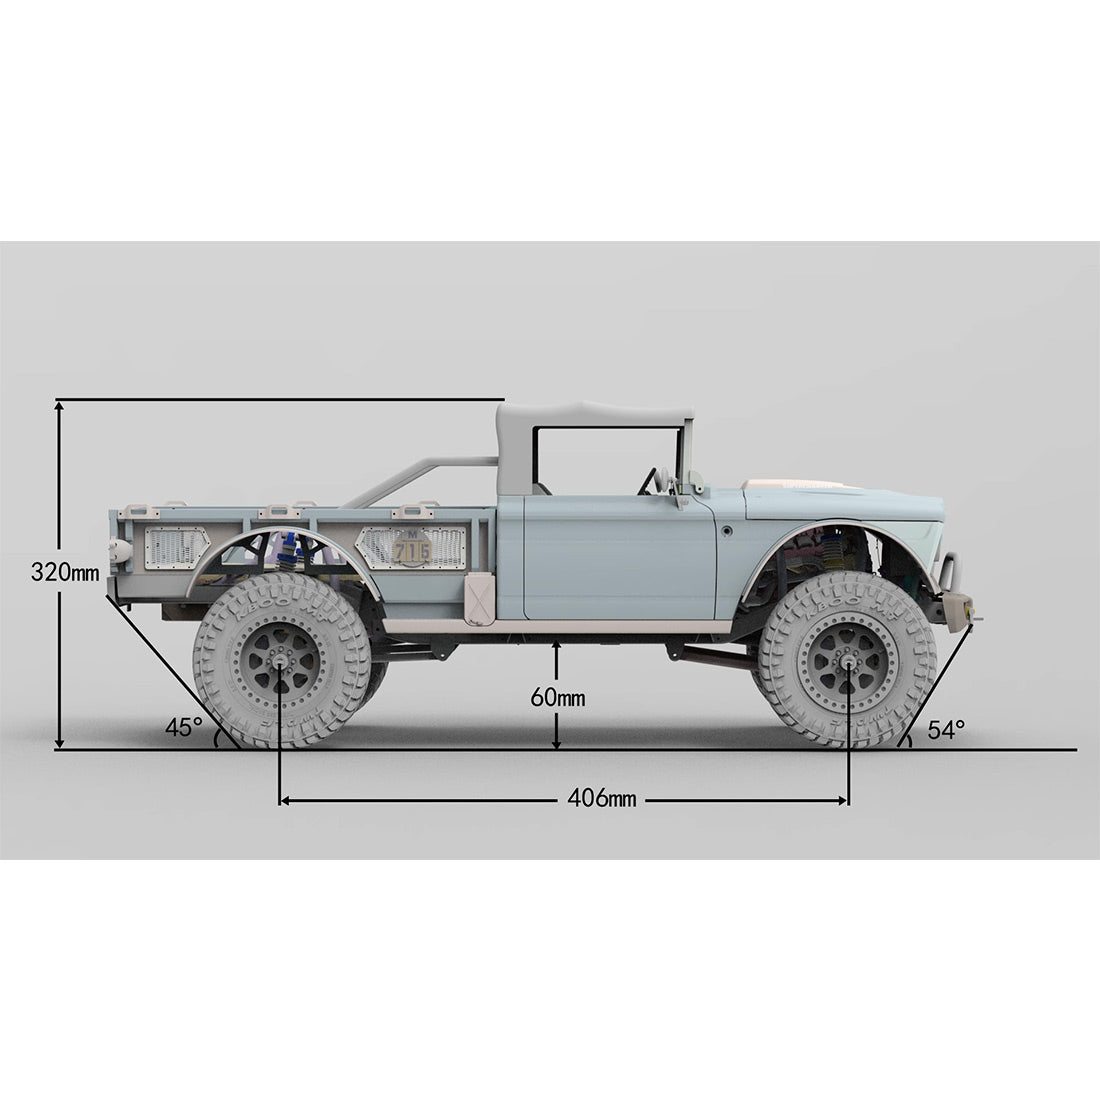 TWOLF M715 1/8 Scale 2.4G RC 4WD Off-Road Climbing Pickup Truck Model KIT - stirlingkit